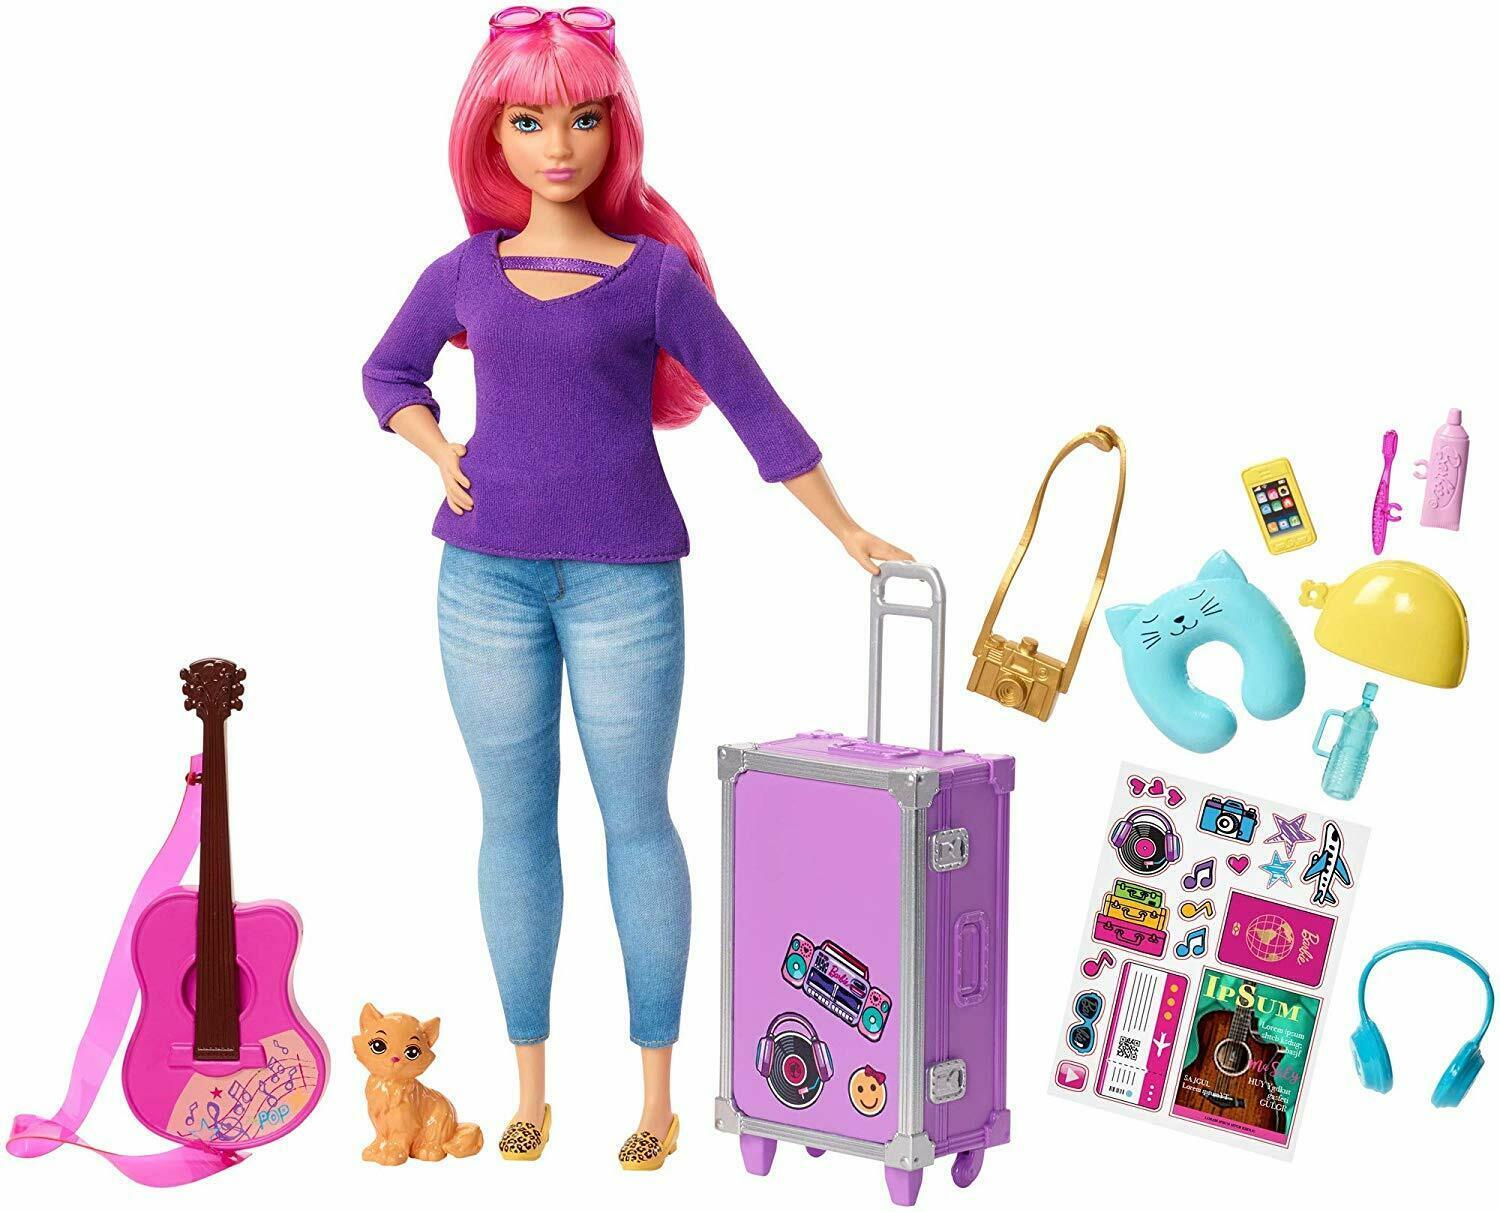 Barbie Doll Daisy Let's Of Travel With Kitten, Luggage, Guitar And 9 Accessories